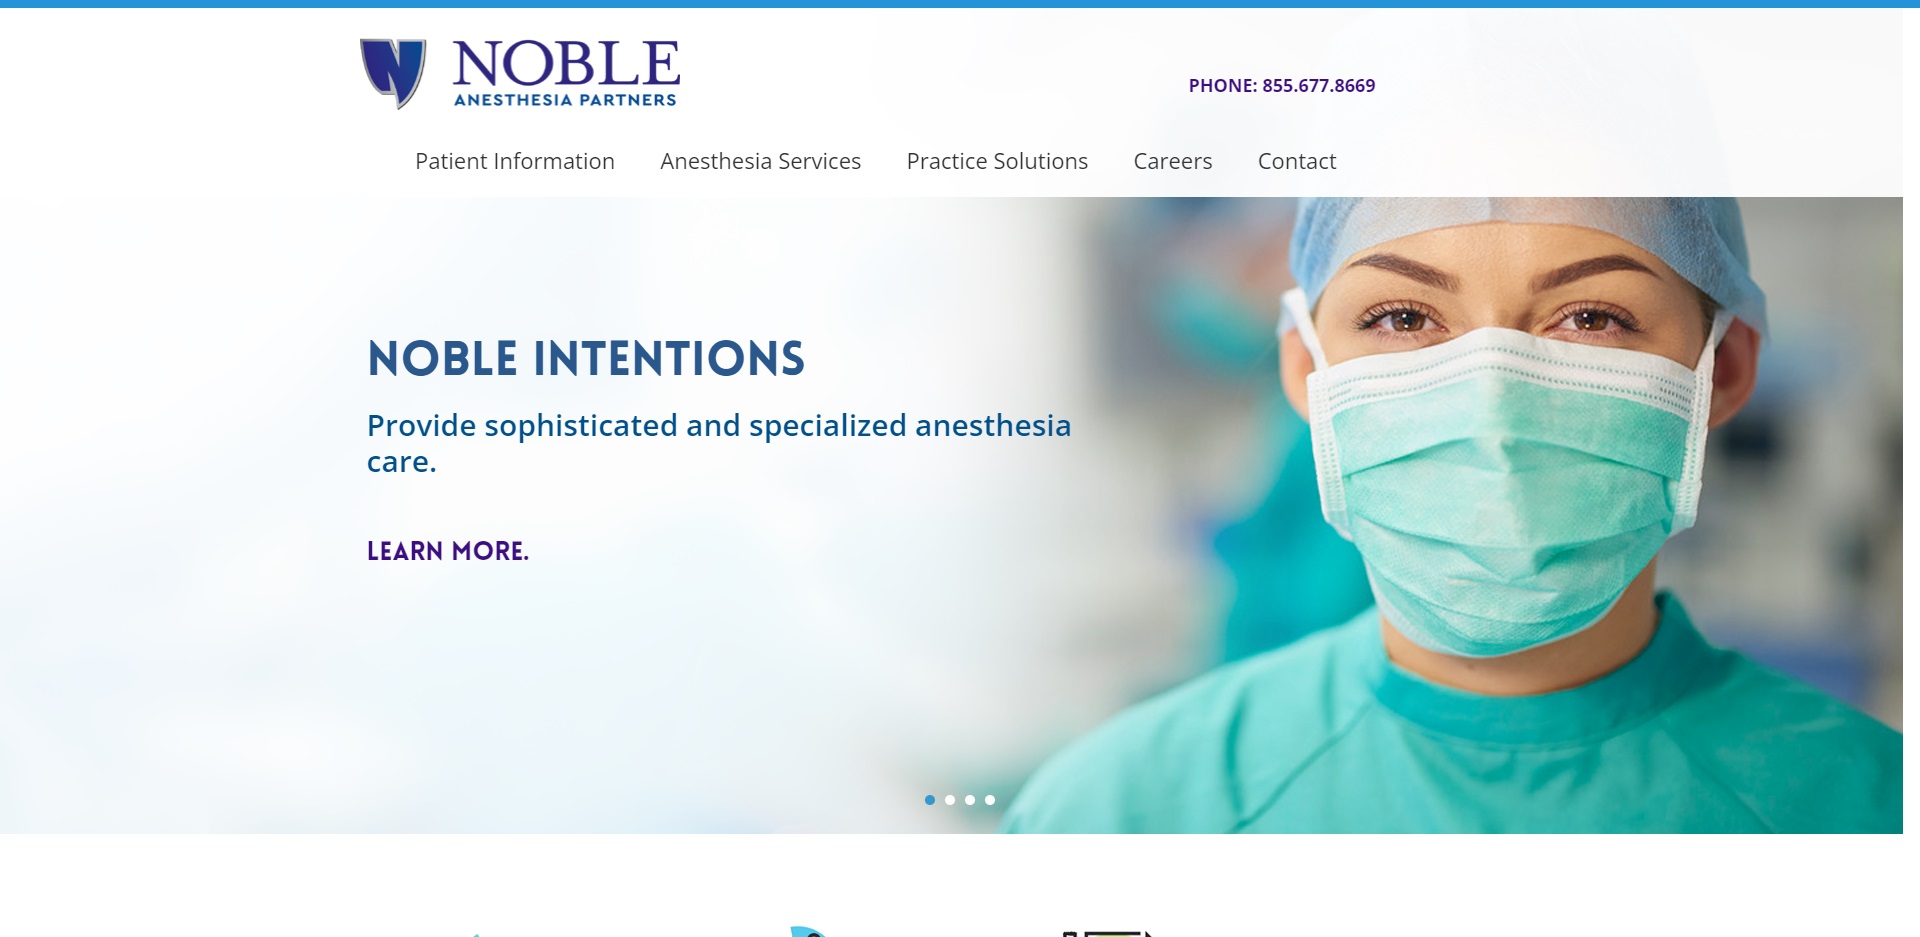 The Best Anaesthesiologists in El Paso, TX